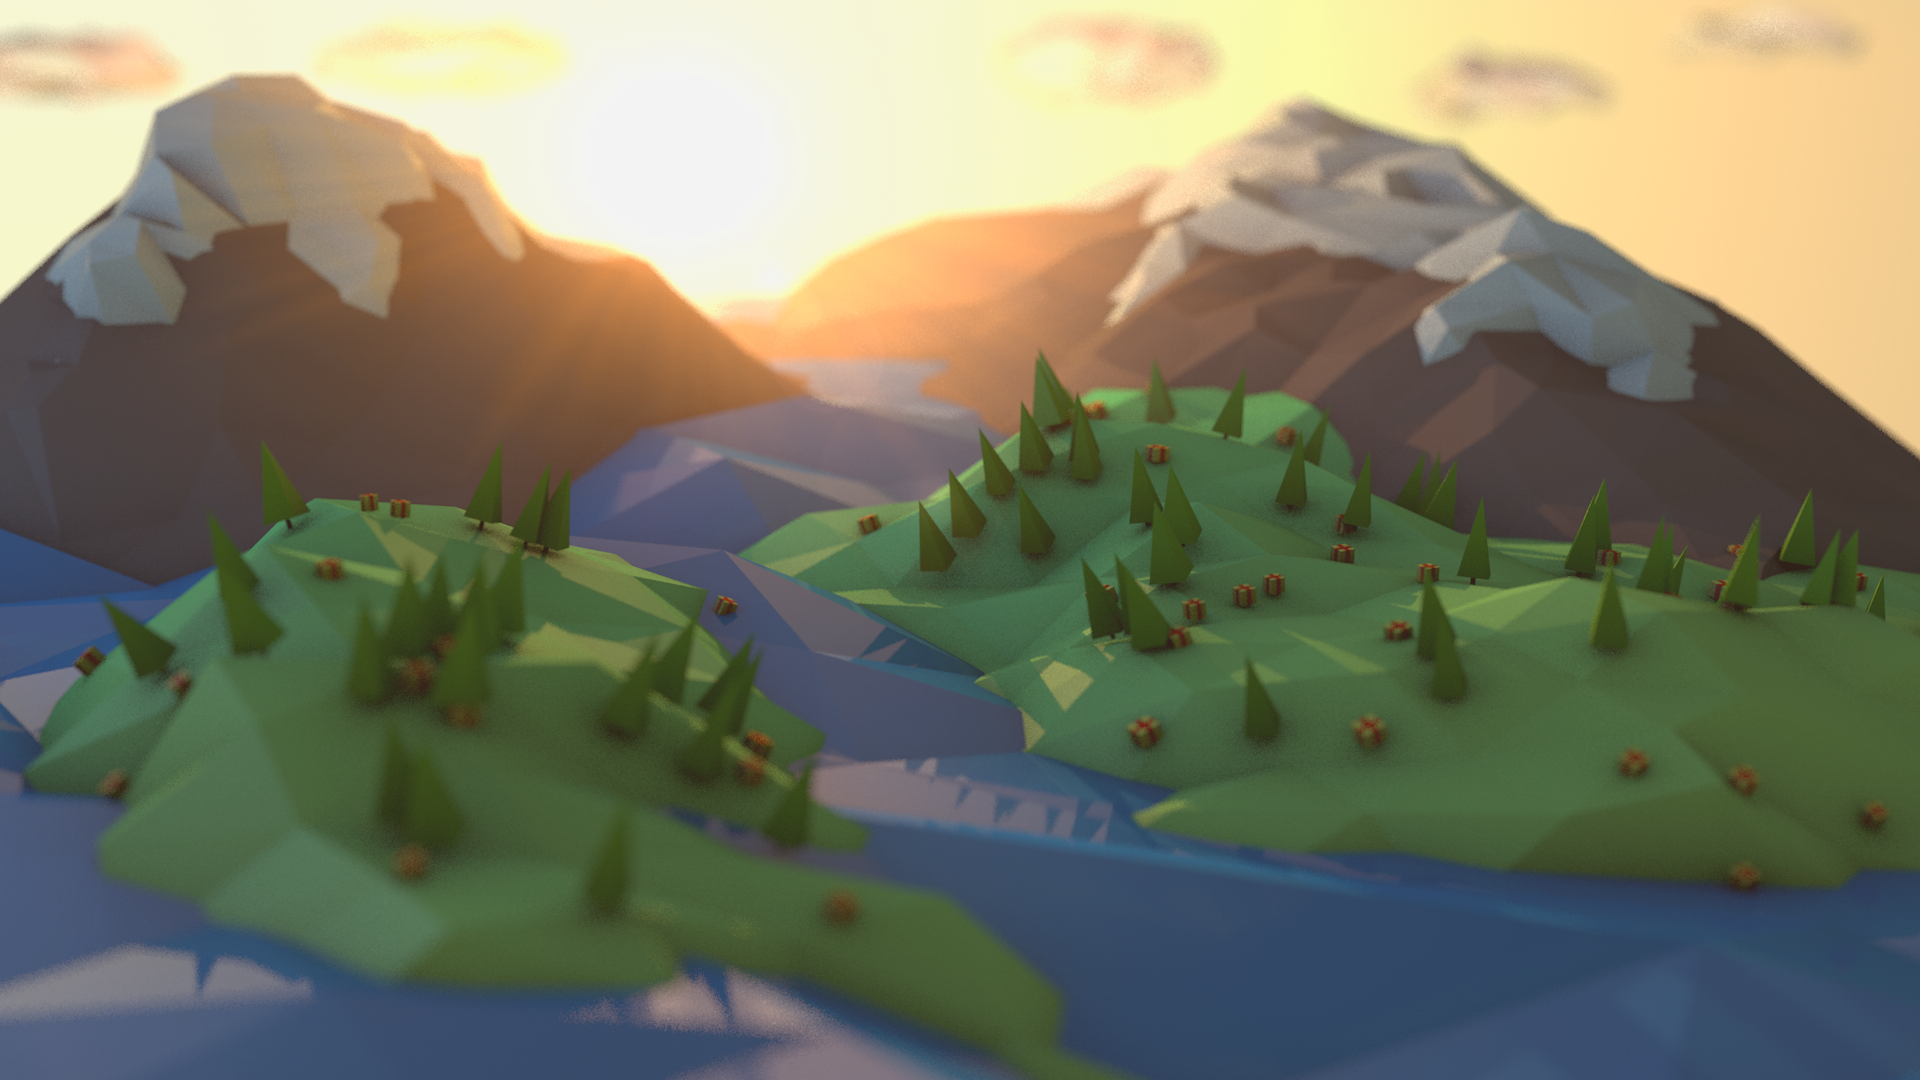 General 1920x1080 low poly digital art landscape mountains sunlight river trees tilt shift presents nature abstract